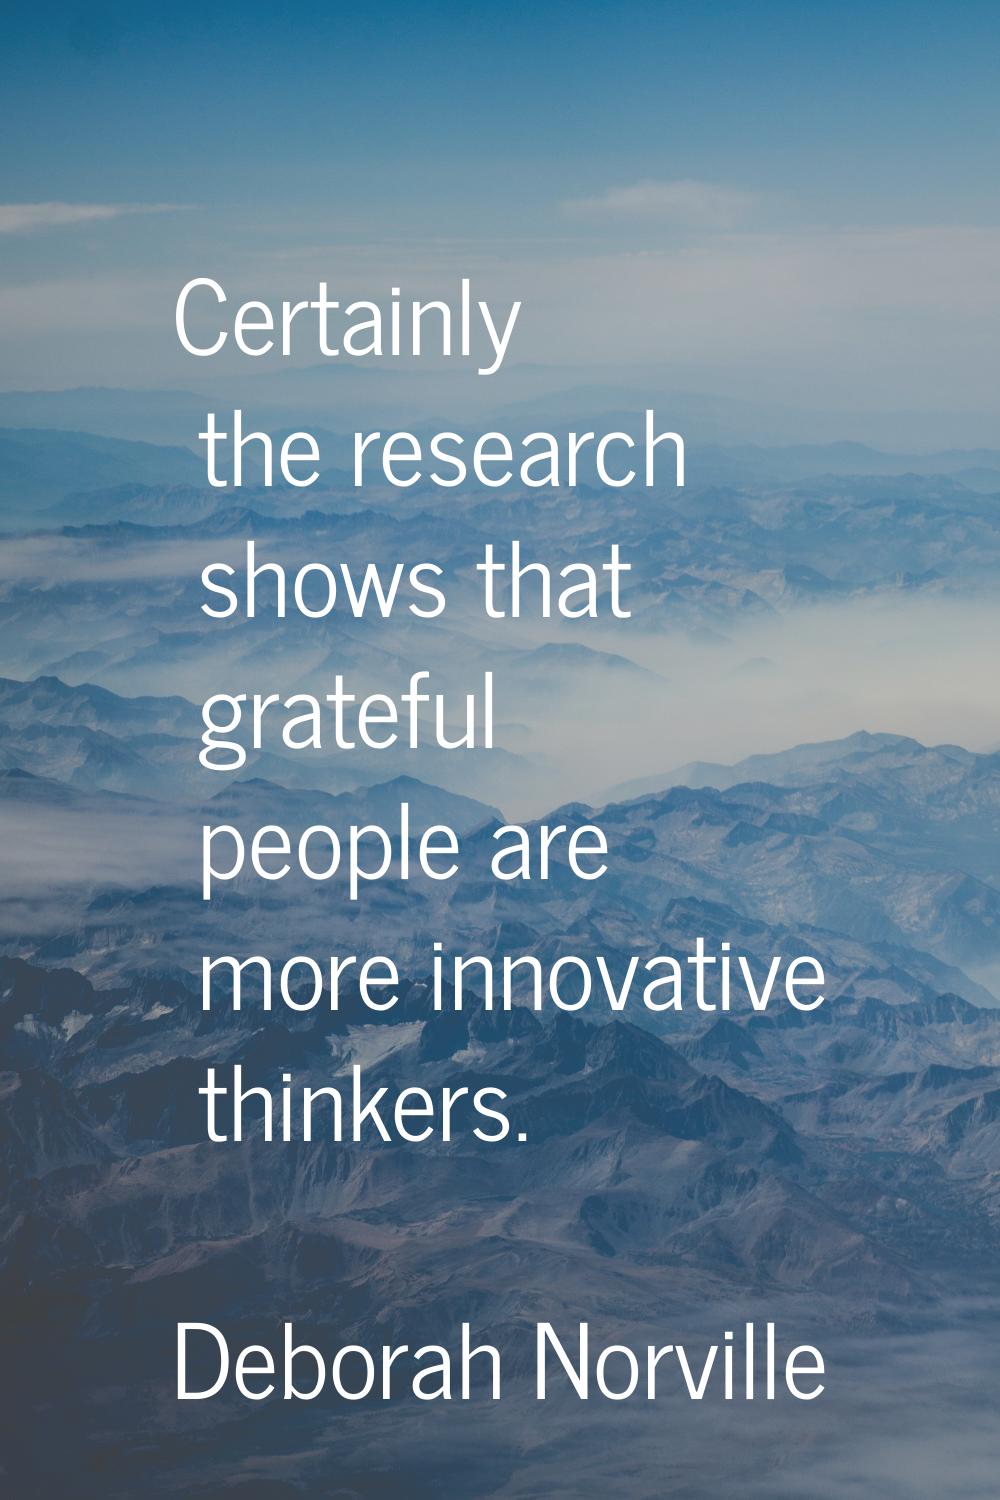 Certainly the research shows that grateful people are more innovative thinkers.